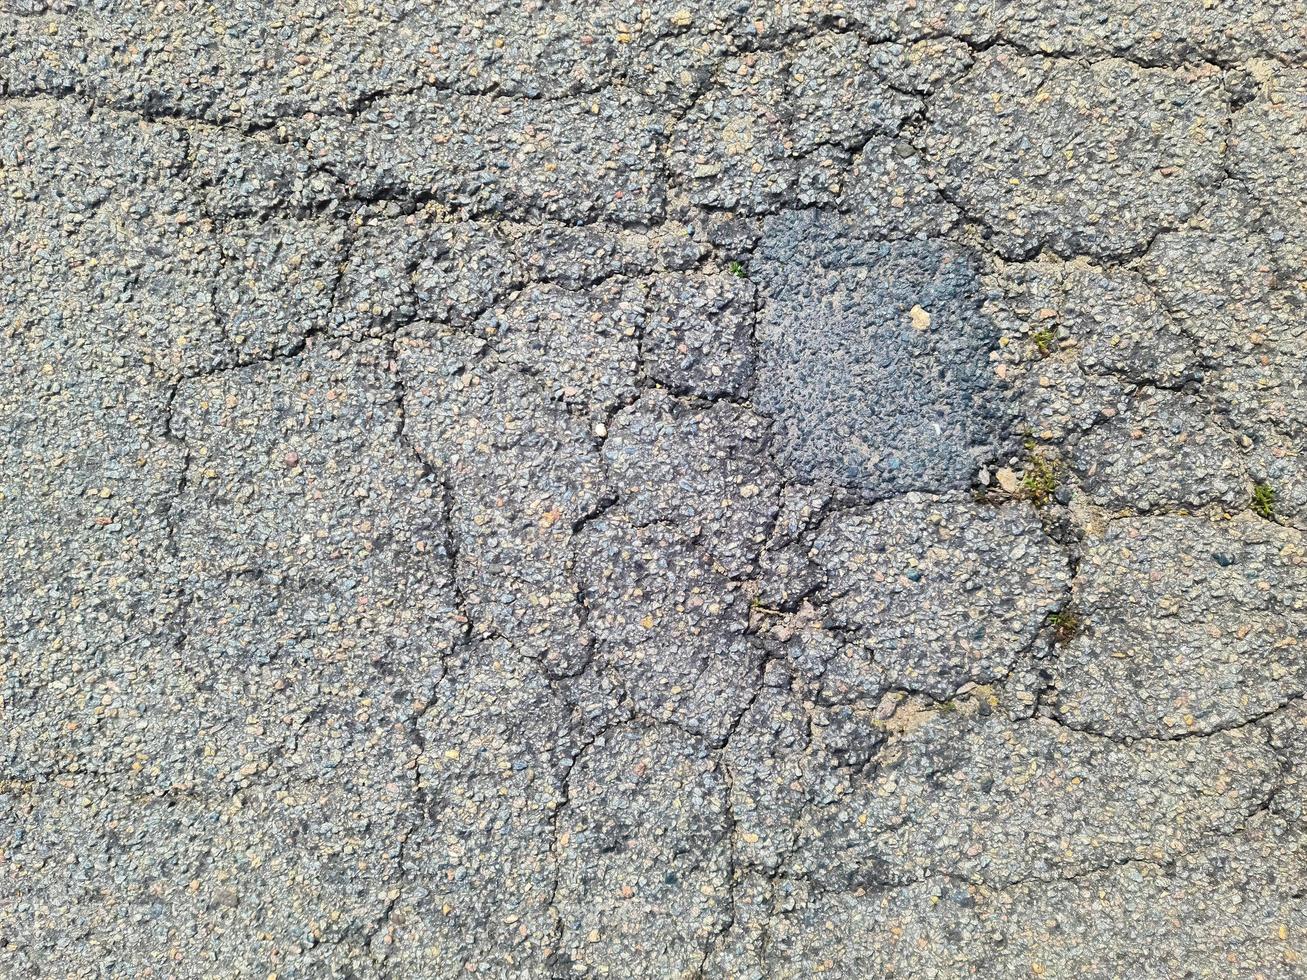 Asphalt surfaces of damaged streets and roads with cracks in a close up. photo